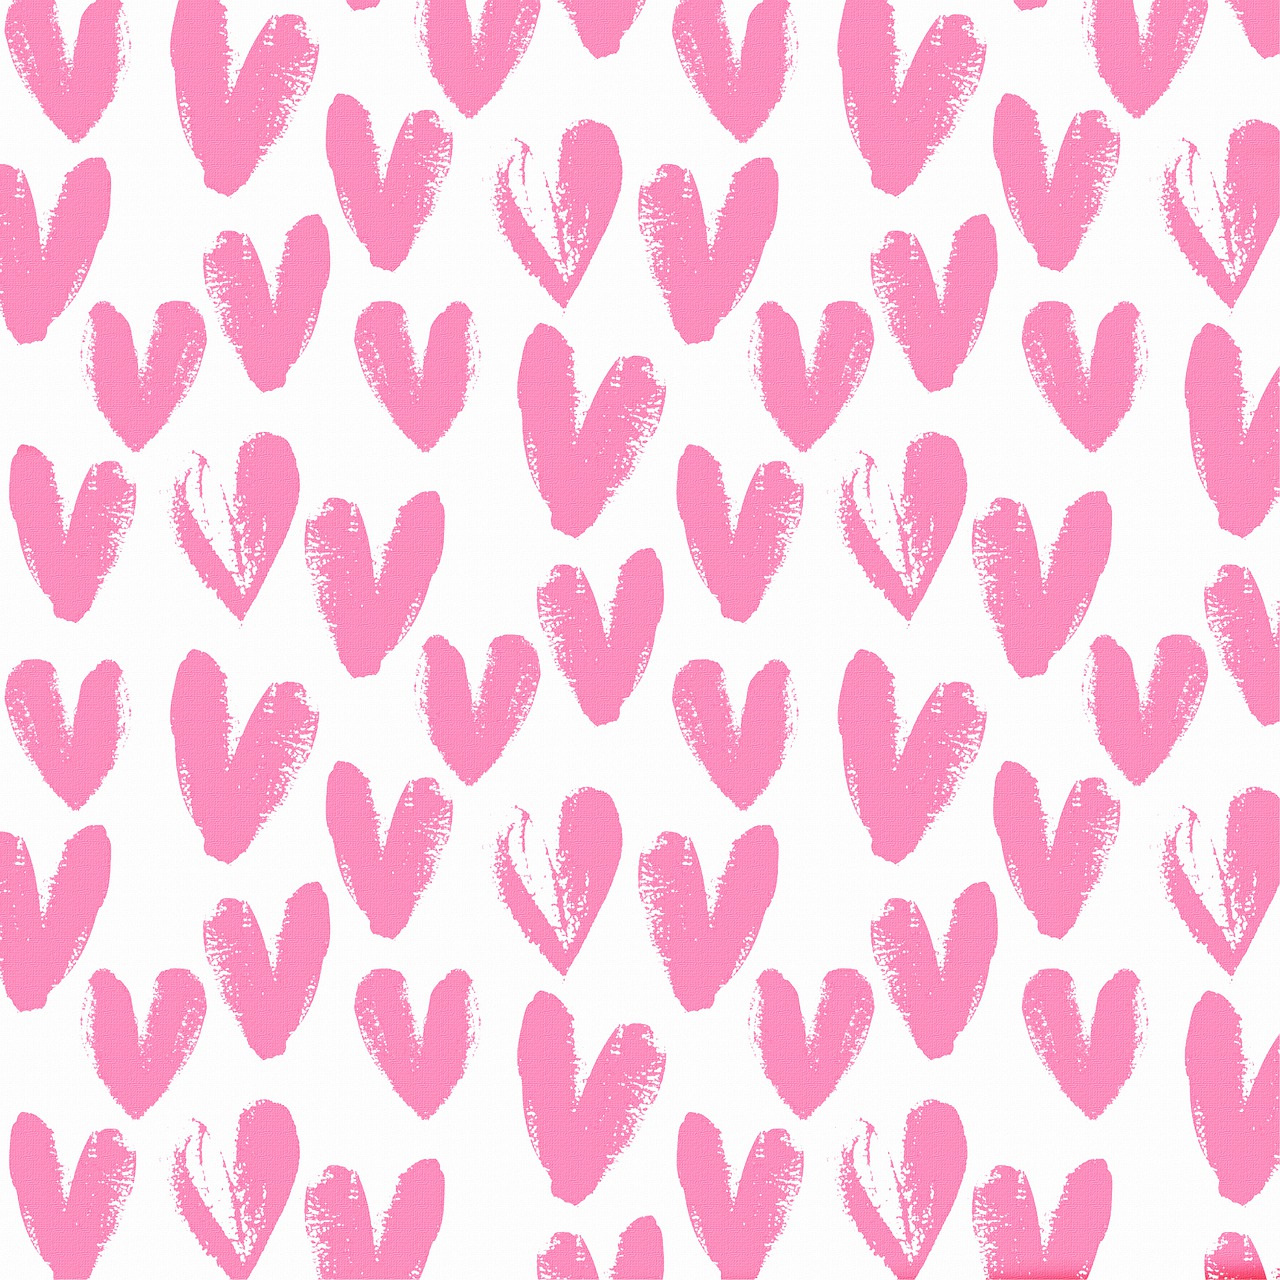 a pattern of pink hearts on a white background, inspired by Peter Alexander Hay, tumblr, happening, small brush strokes, desktop, background image, bright ”